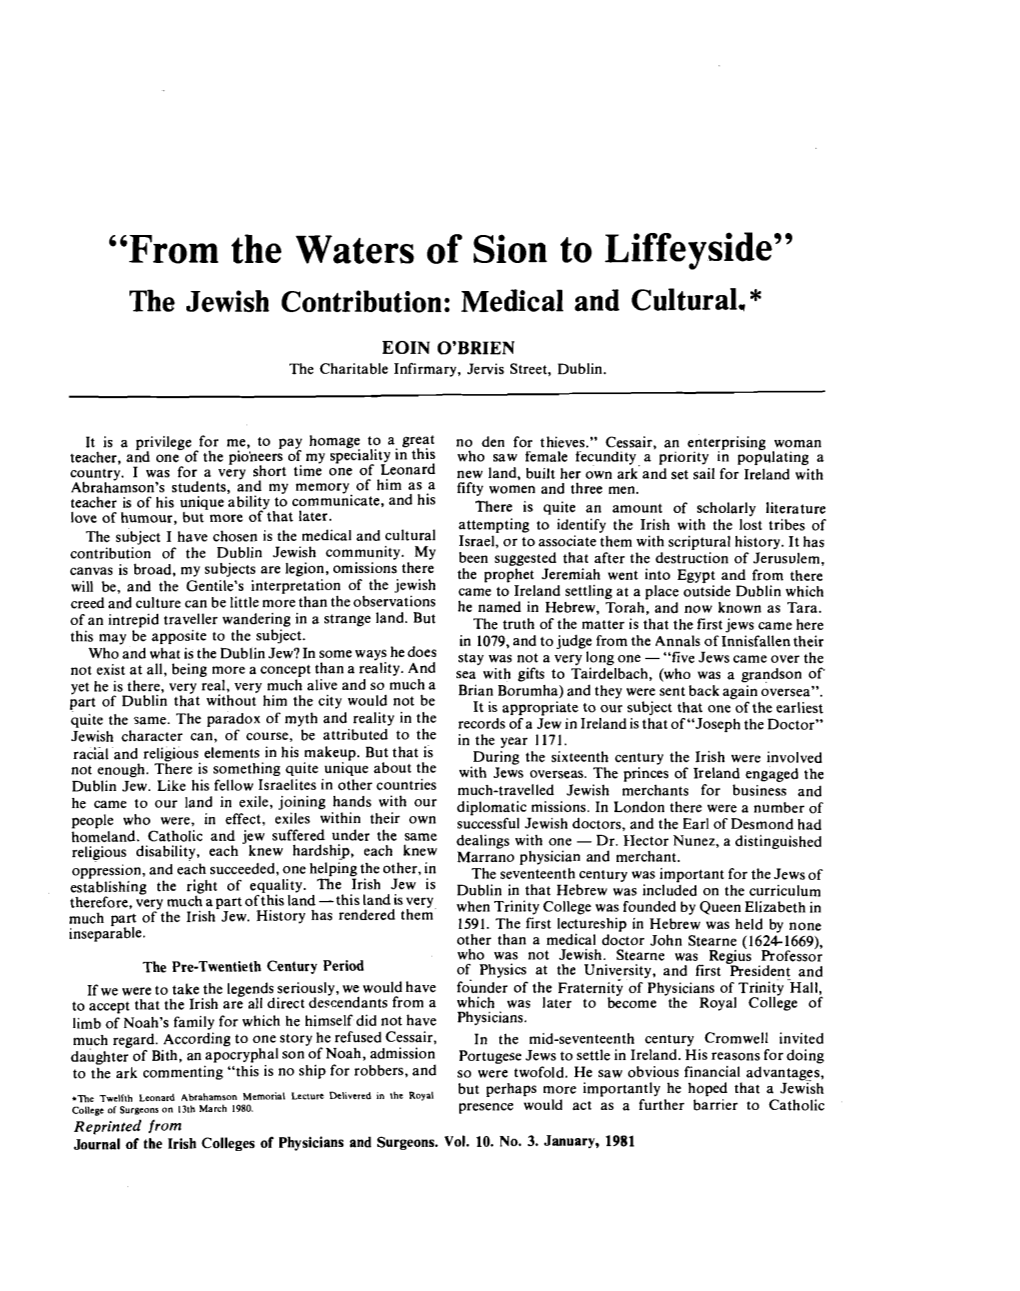 'From the Waters of Sion to Liffeyside'. the Jewish Contribution